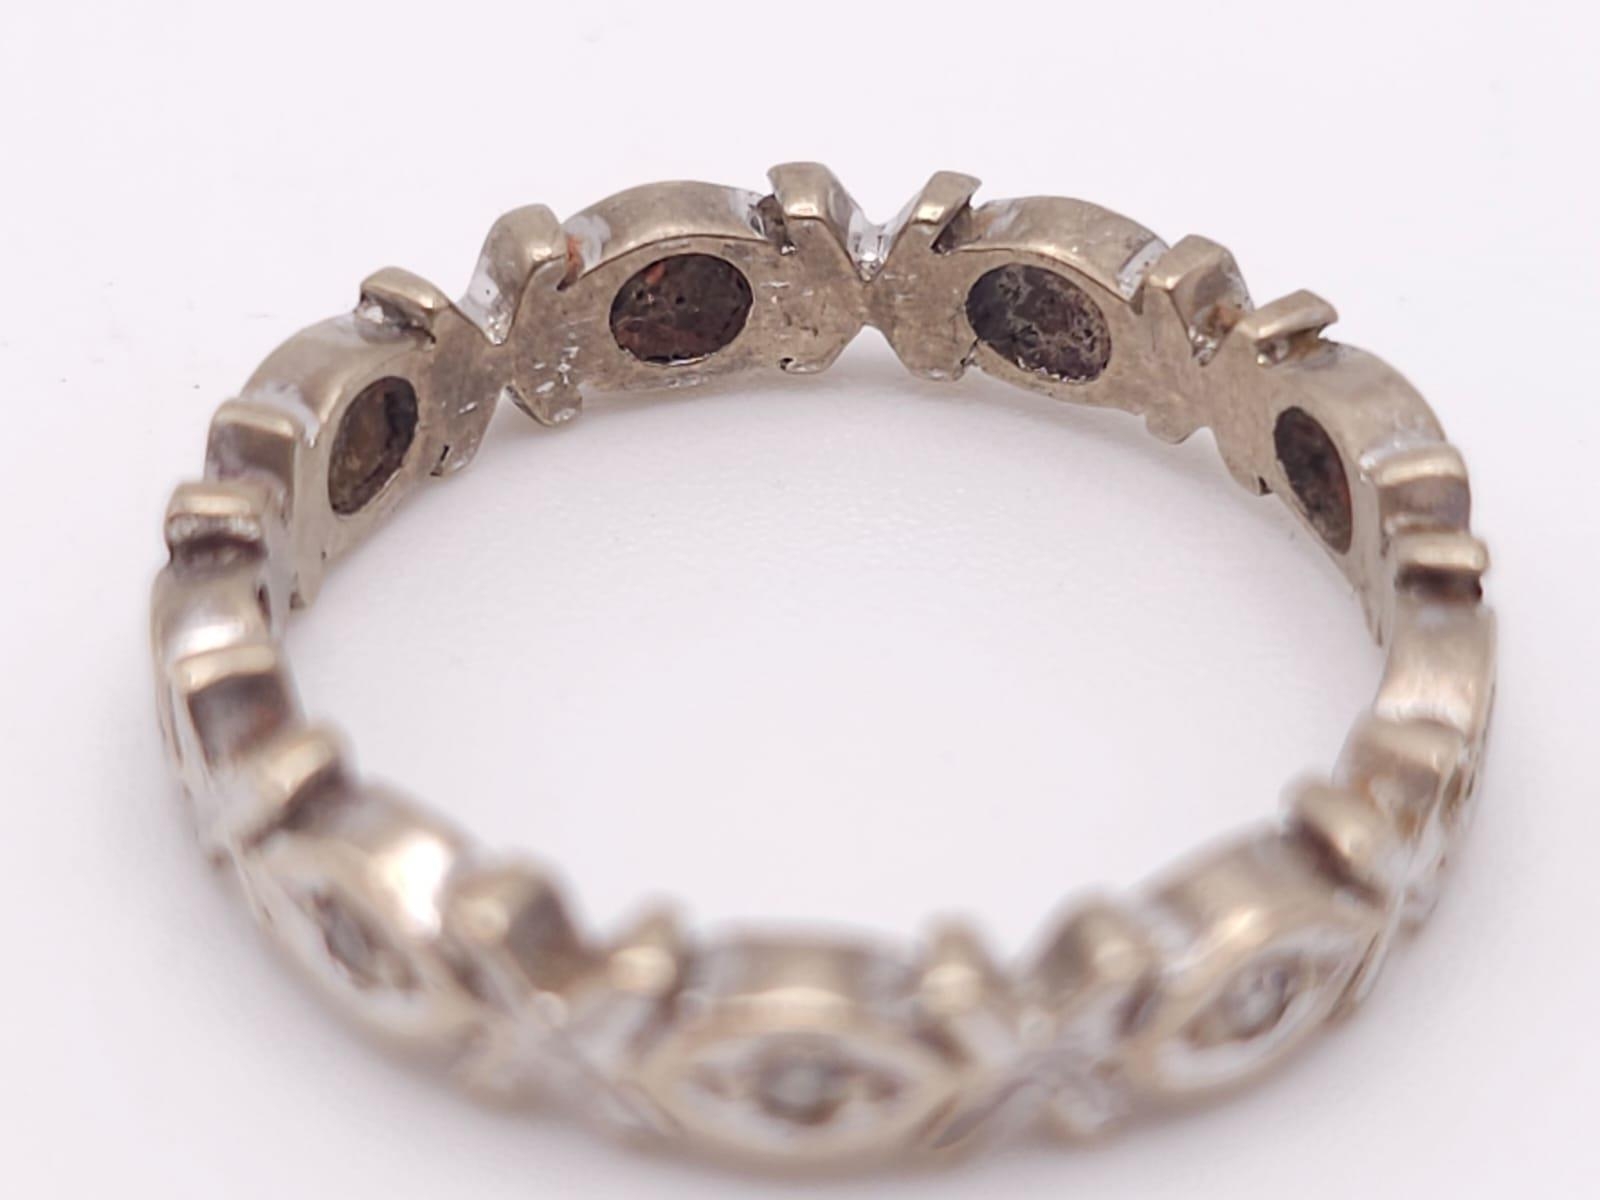 A Vintage 18K White Gold Diamond Eternity Ring. Size K. 3.08g total weight. Ref: 016302 - Image 4 of 5